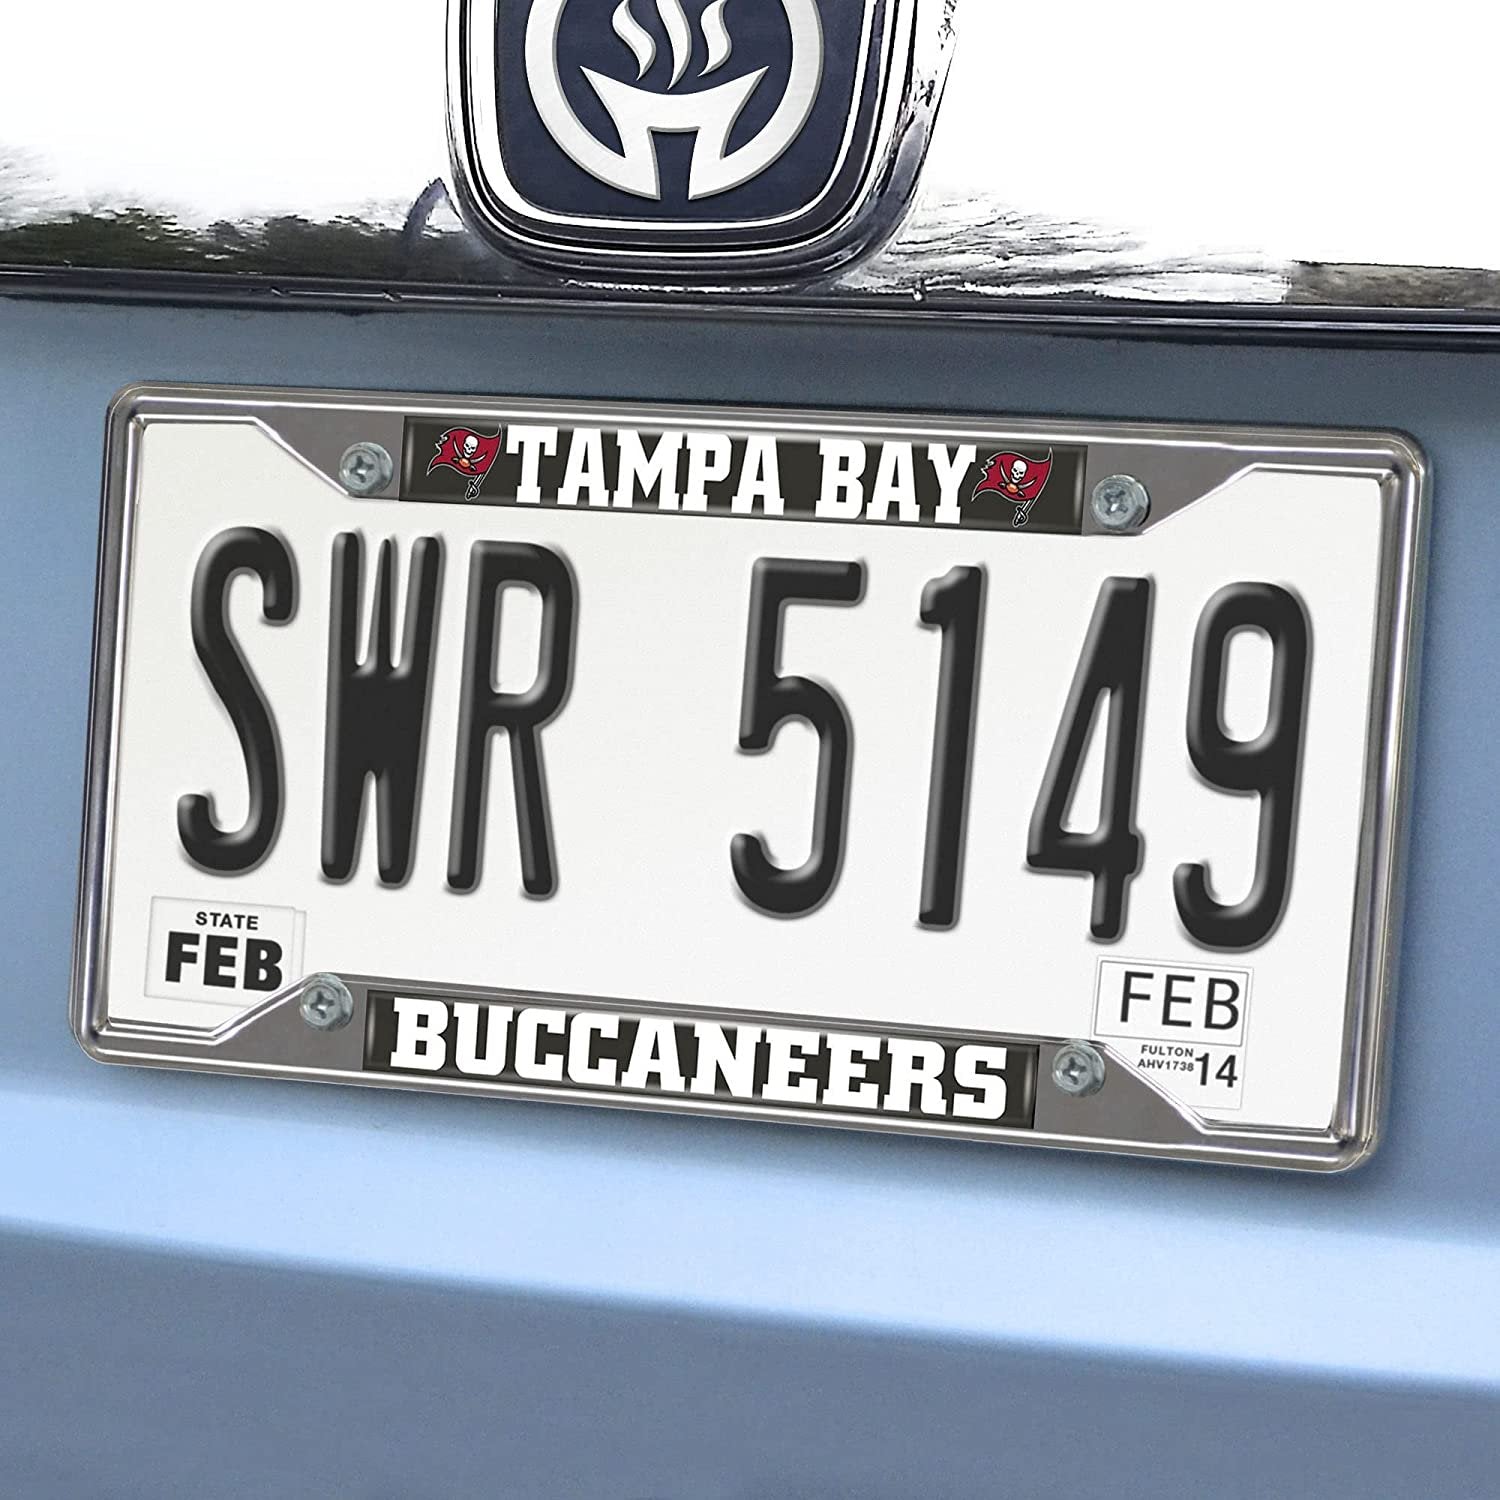 Tampa Bay Buccaneers Metal License Plate Frame Chrome Tag Cover 6x12 Inch